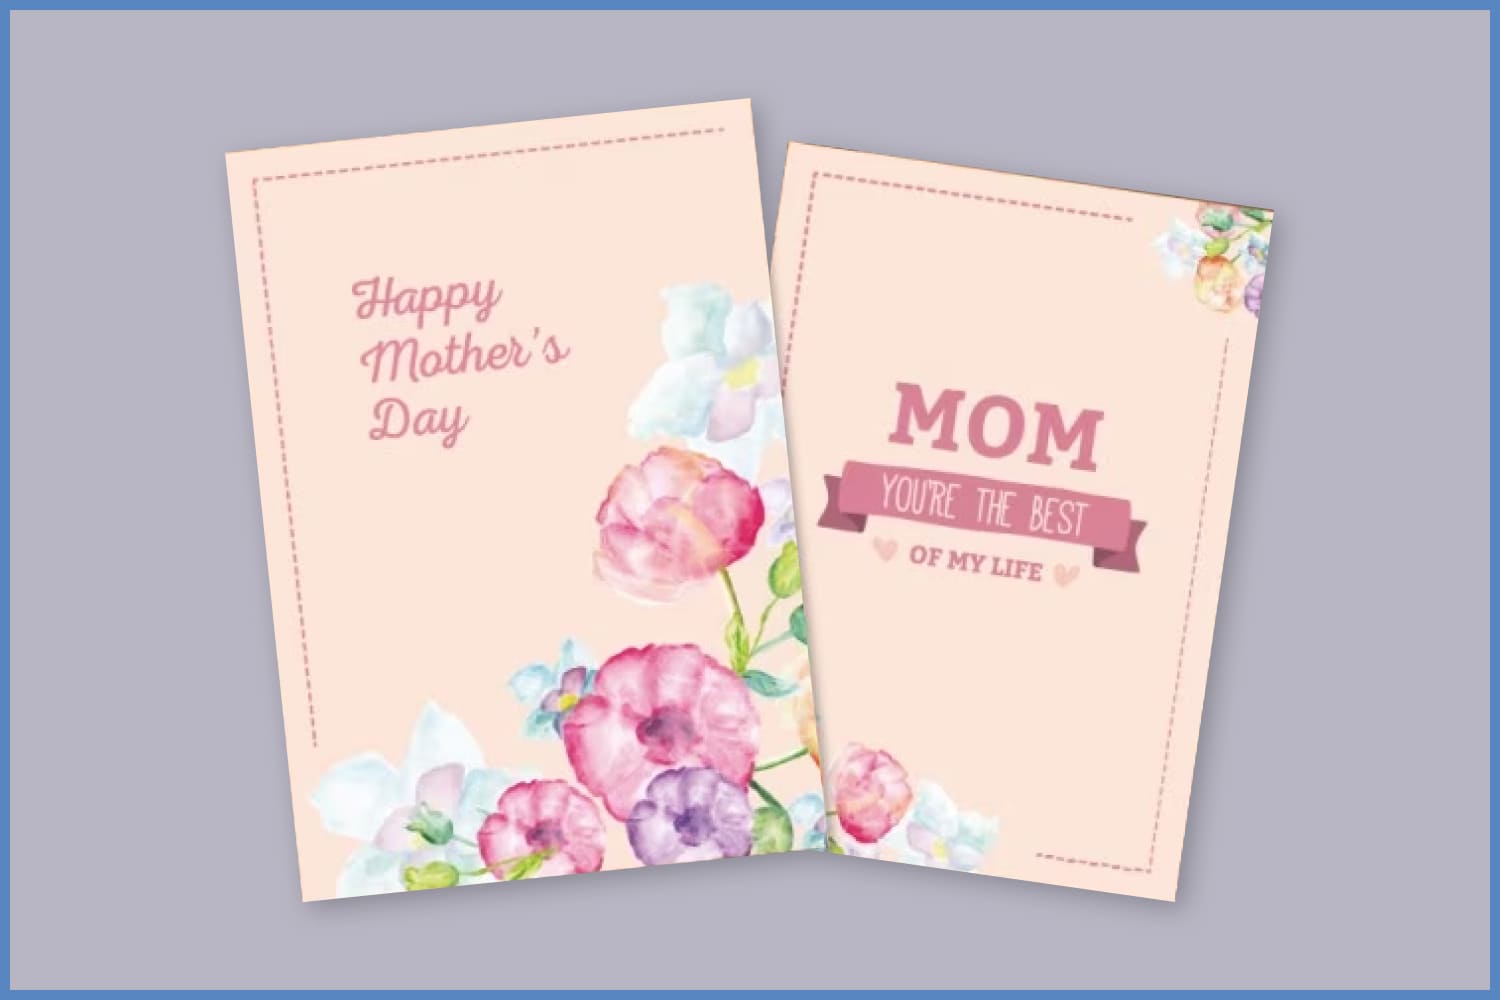 Collage of beige cards with the image of flowers for Mother's Day.